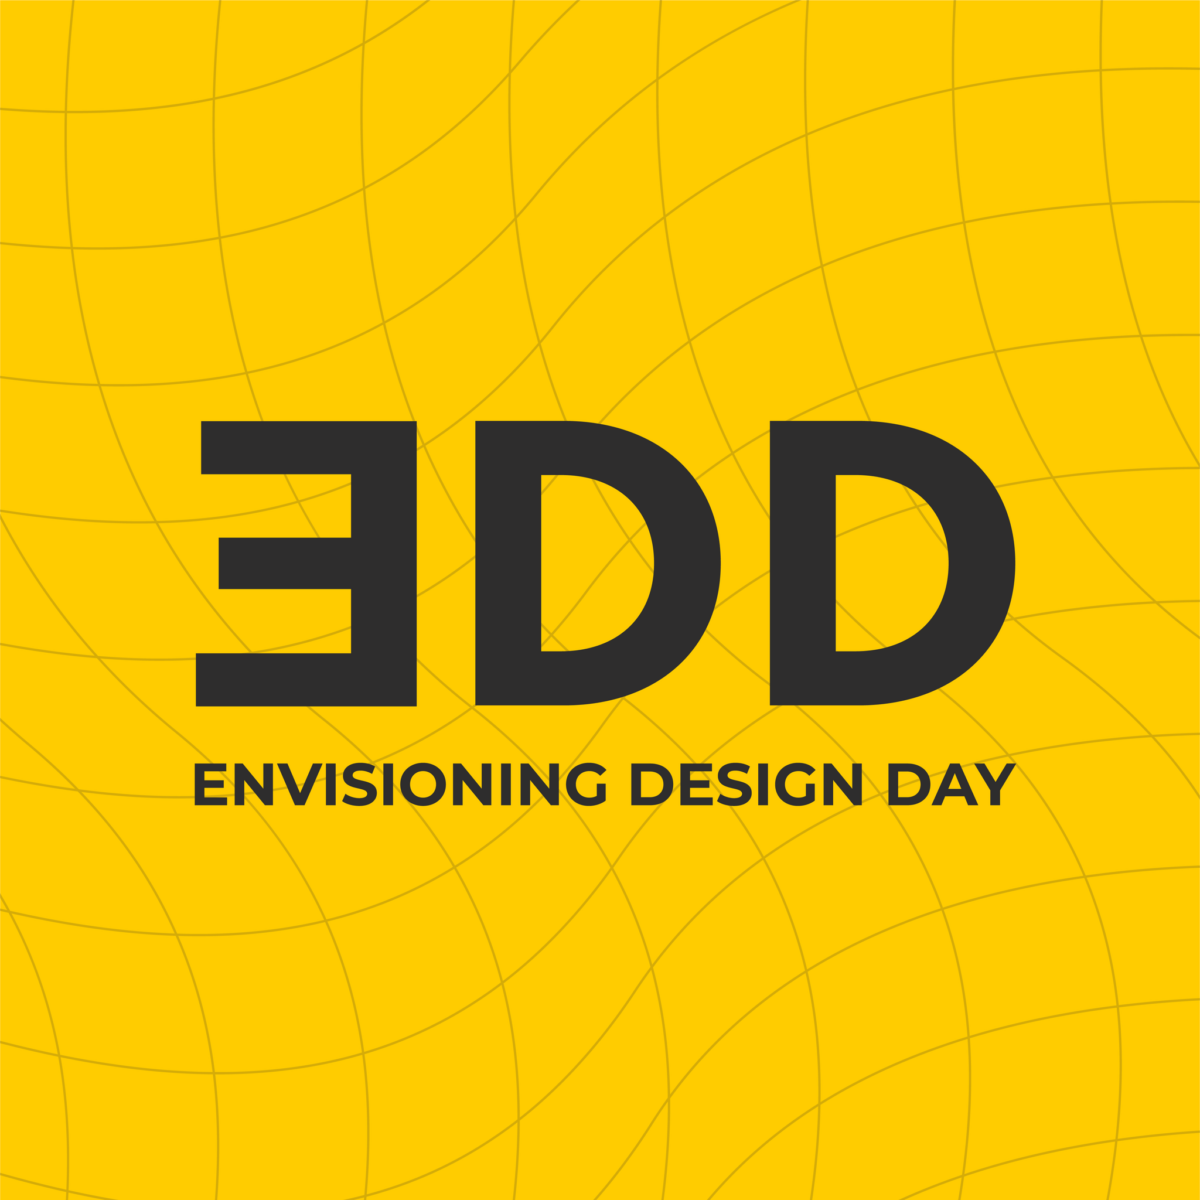 CIMsystem will participate with a speech and live demo at Envisioning Design Day 2022, June 11, at NABA - Nuova Accademia di Belle Arti, Milan.